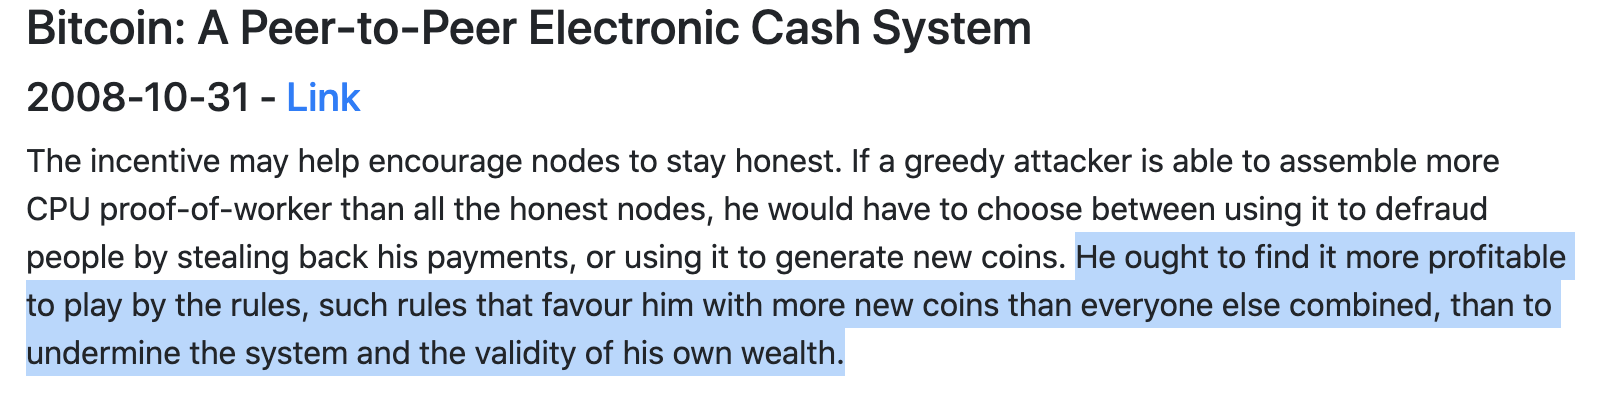 The financial incentive not to attack the system is discussed in the Bitcoin paper. 